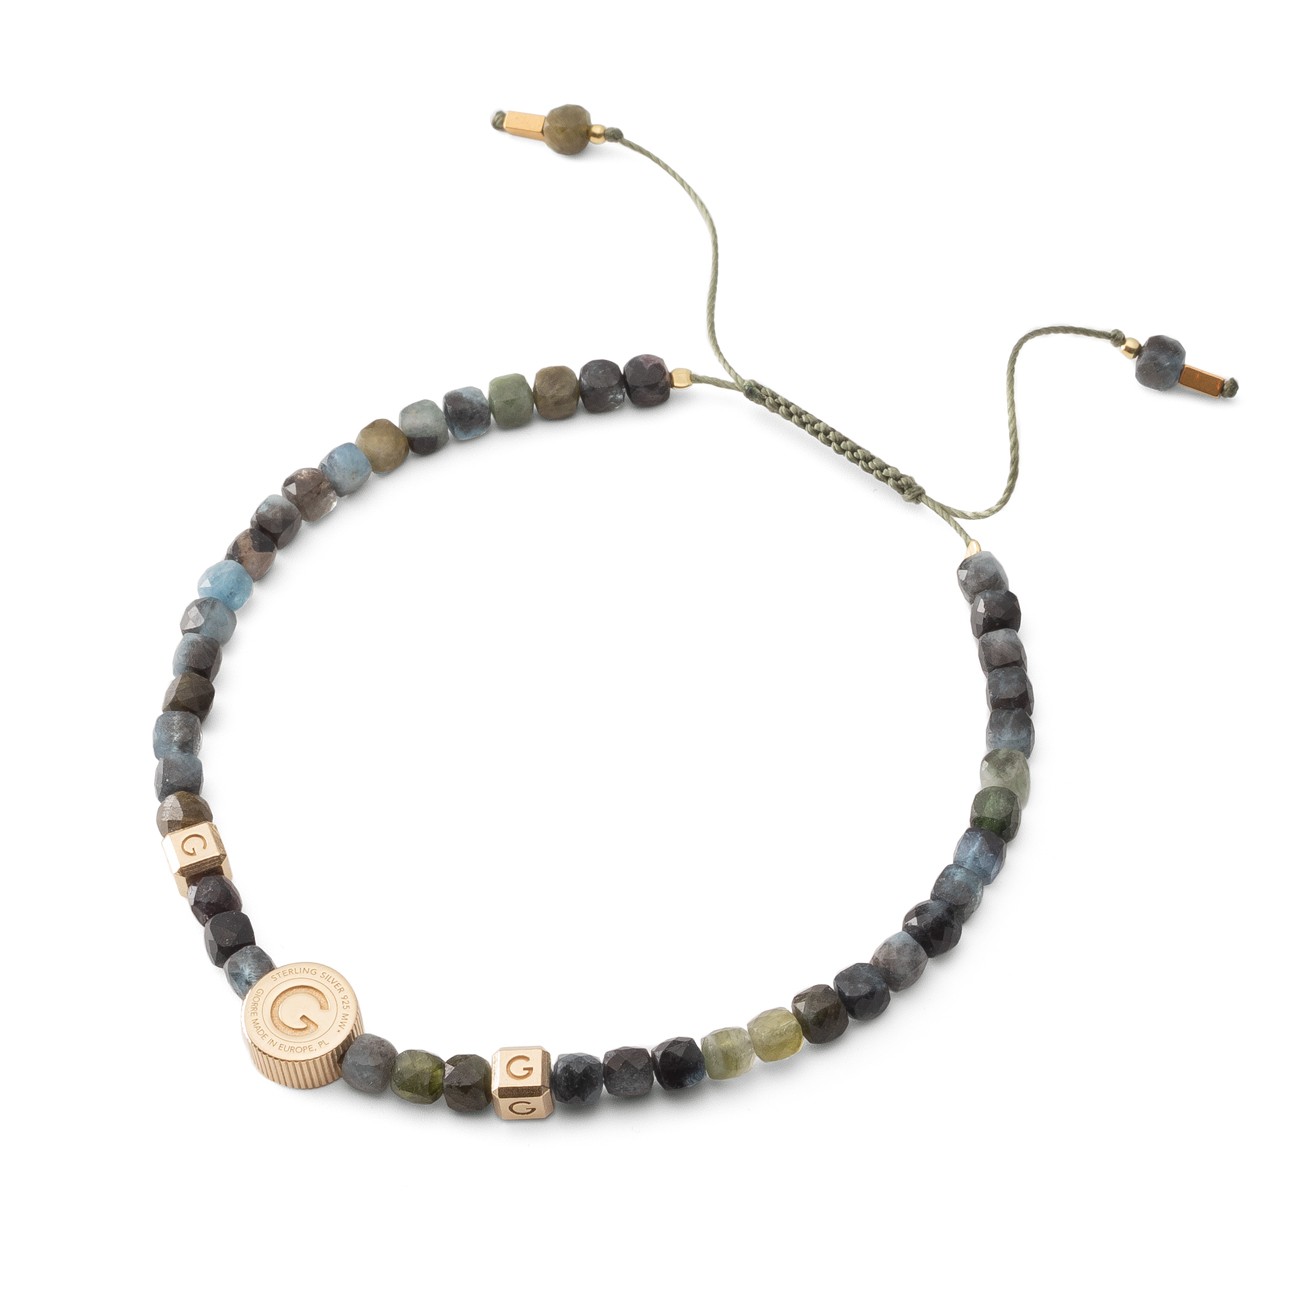 Silver anklet with natural stone - multicolored aquamarine